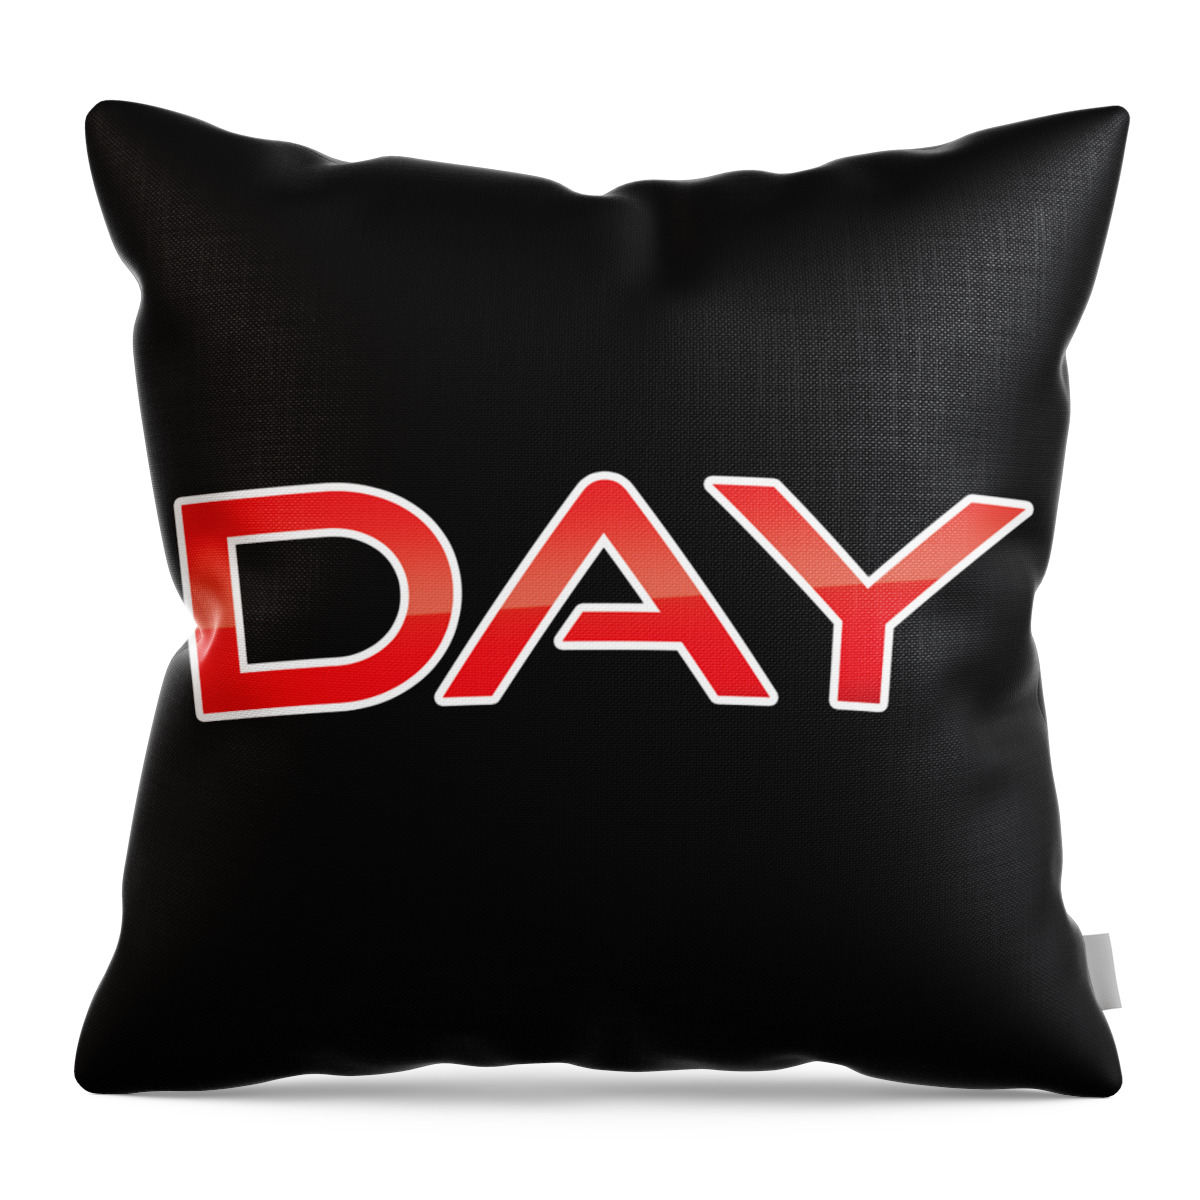 Day Throw Pillow featuring the digital art Day by TintoDesigns